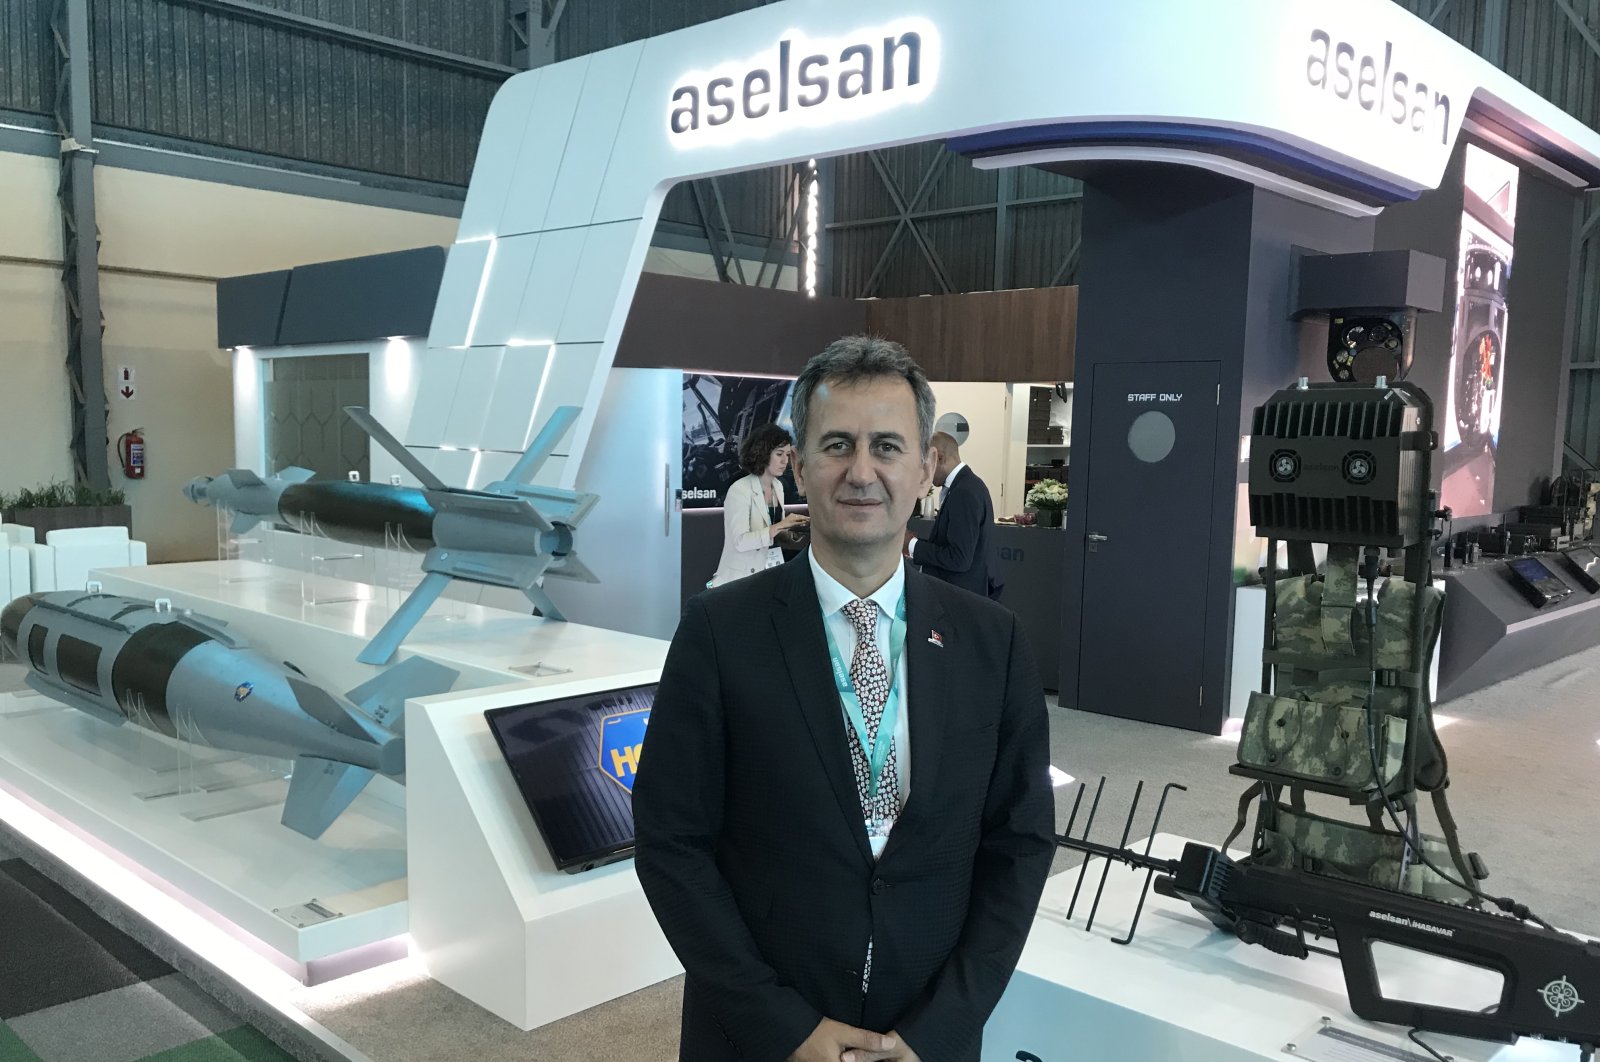 The company&#039;s CEO Haluk Görgün poses at Aselsan&#039;s booth in tje defense fair, in Pretoria, South Africa, Sept. 21, 2022. (AA PHOTO)